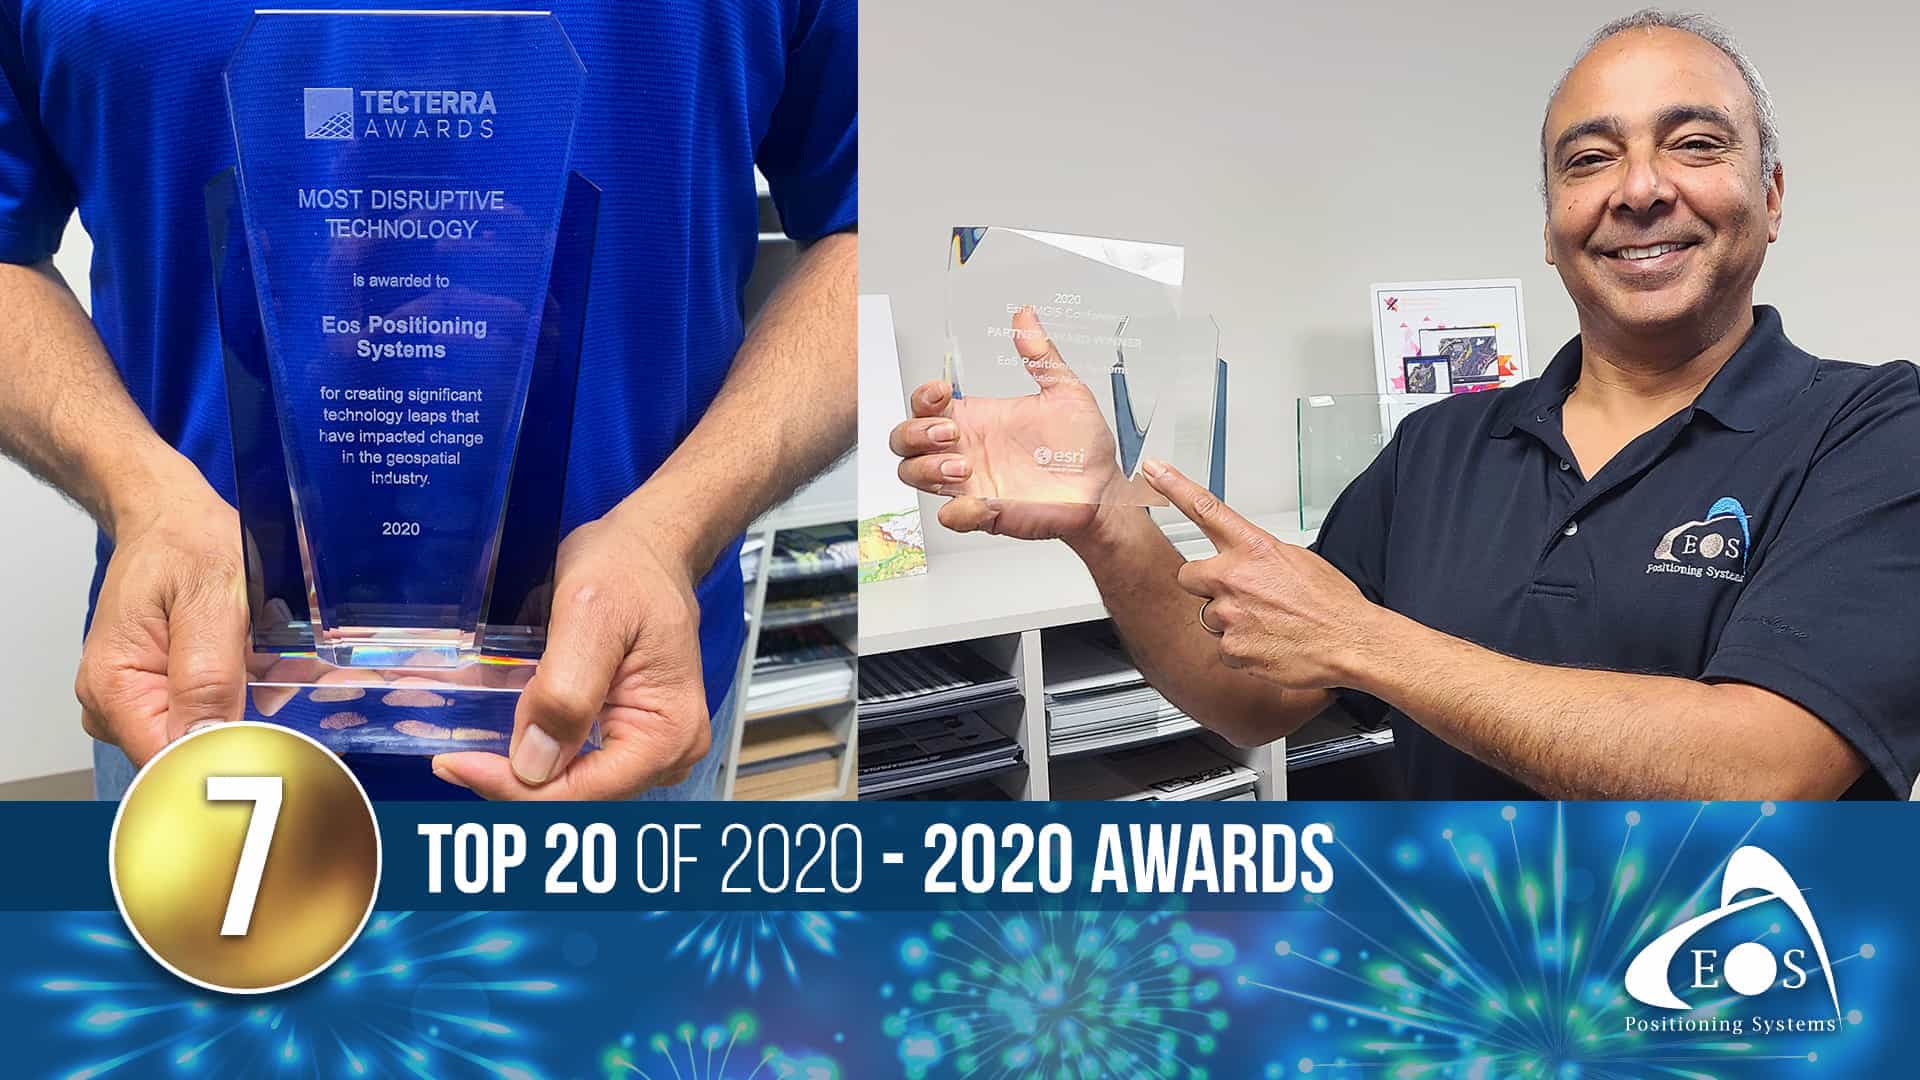 Eos Positioning Systems blog top articles of 2020: awards